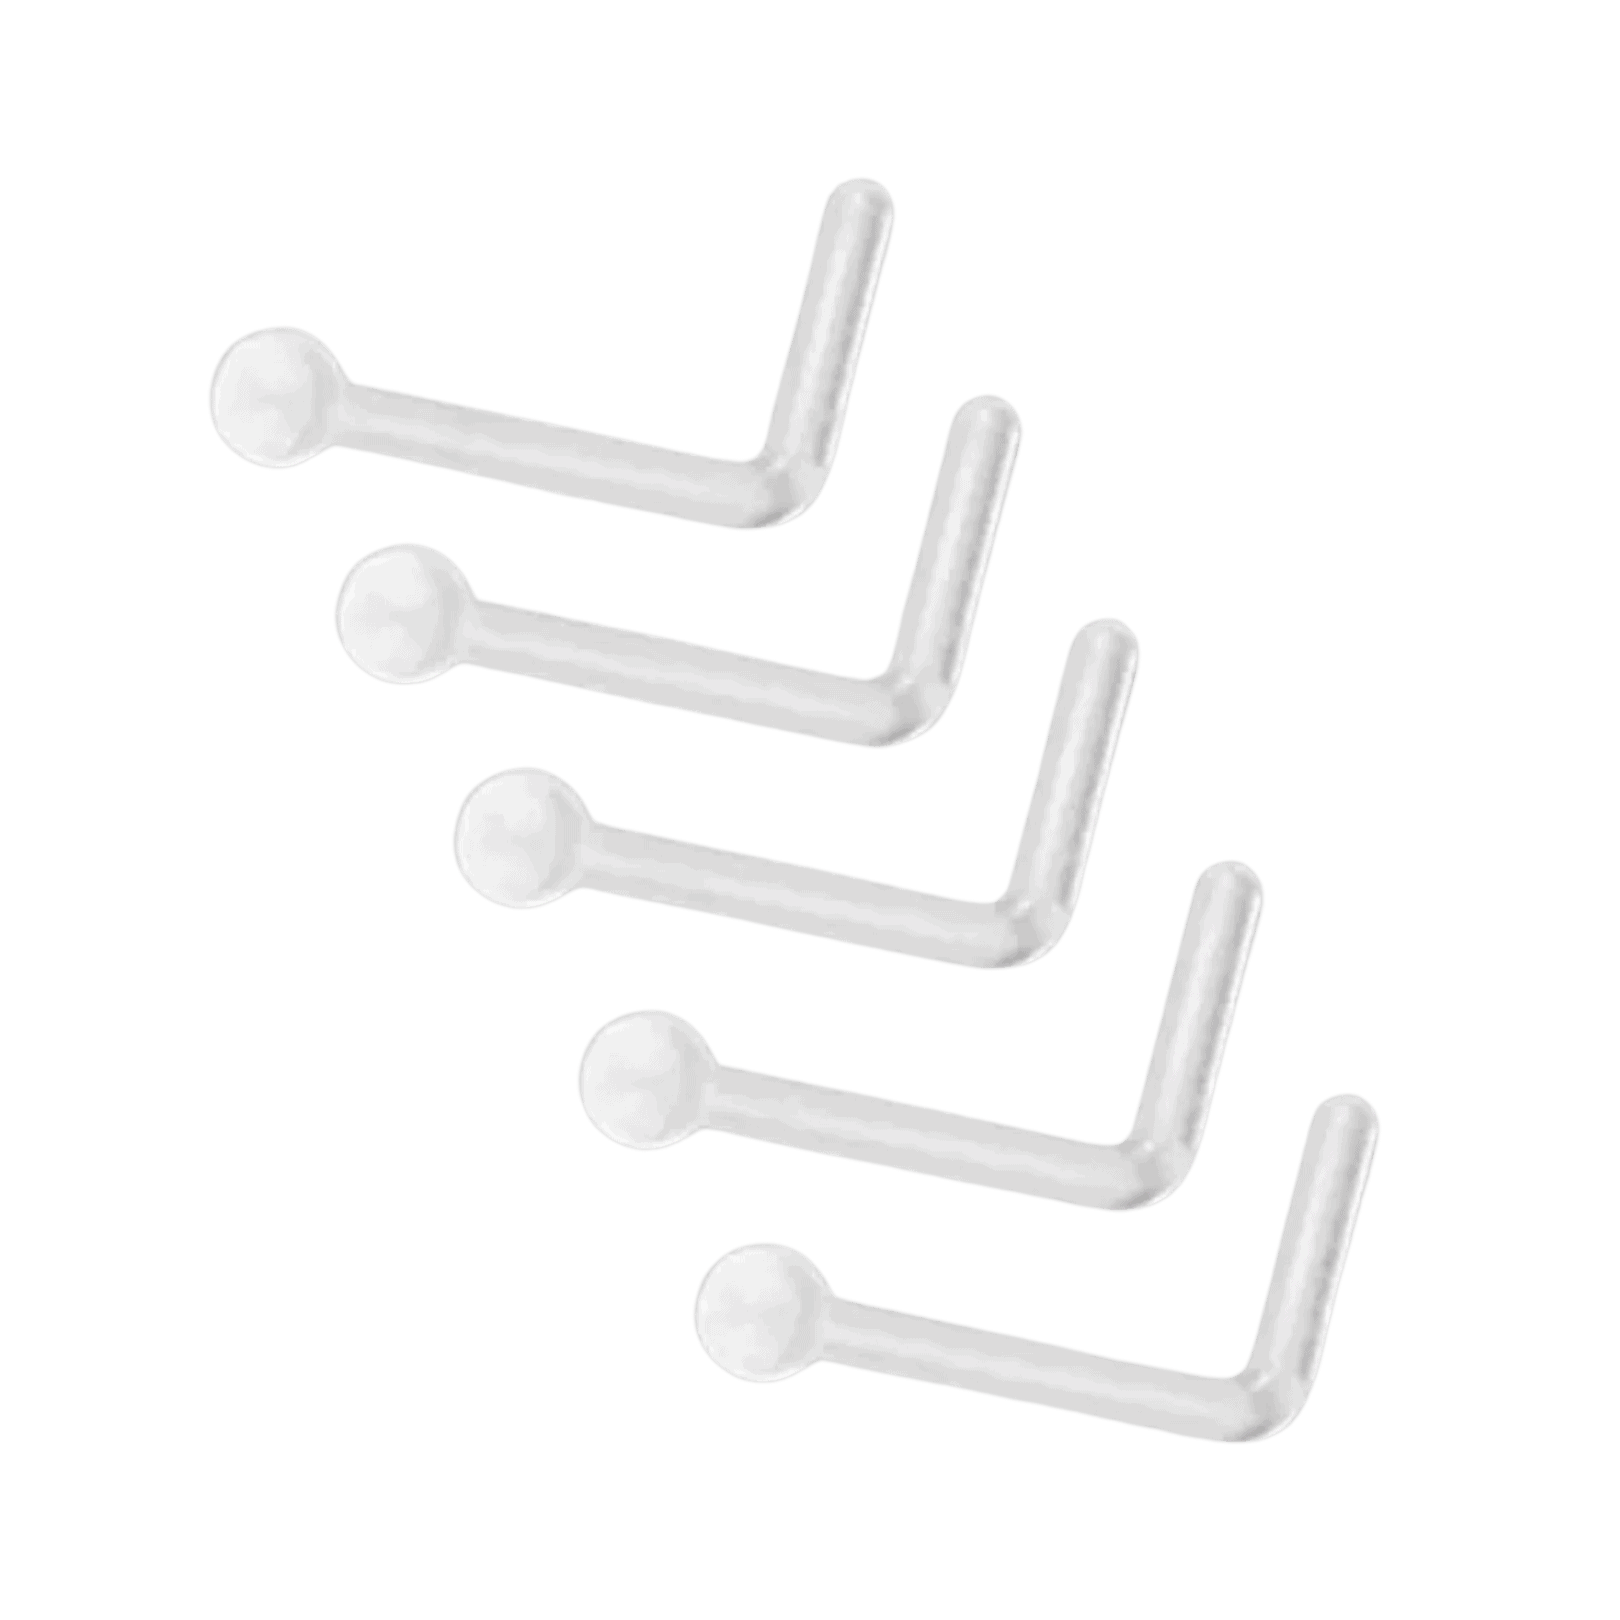 ball top silicon plastic nose L-stud for nose piercing